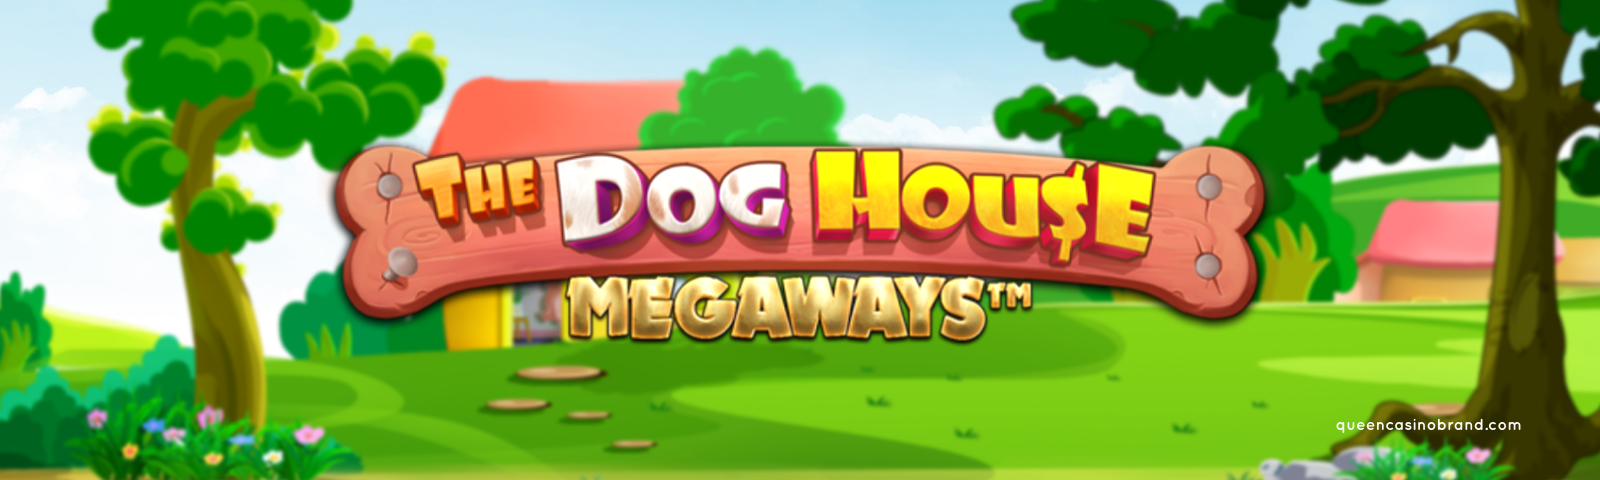 The Dog House Megaways Slot Game Online by Pragmatic Play